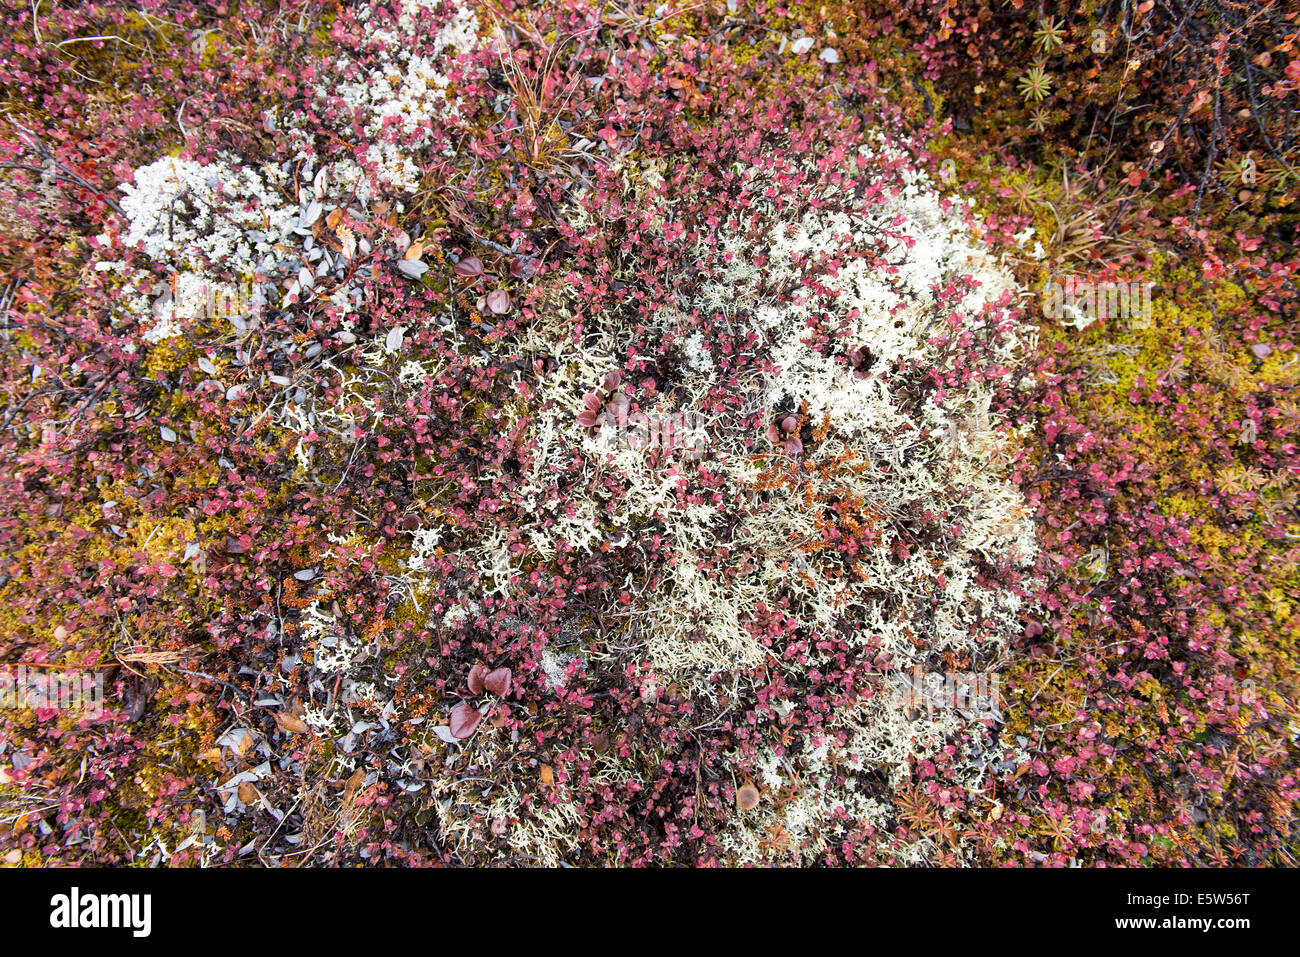 Background of arctic tundra vegetation with lichen, dwarf birch and mosses Stock Photo